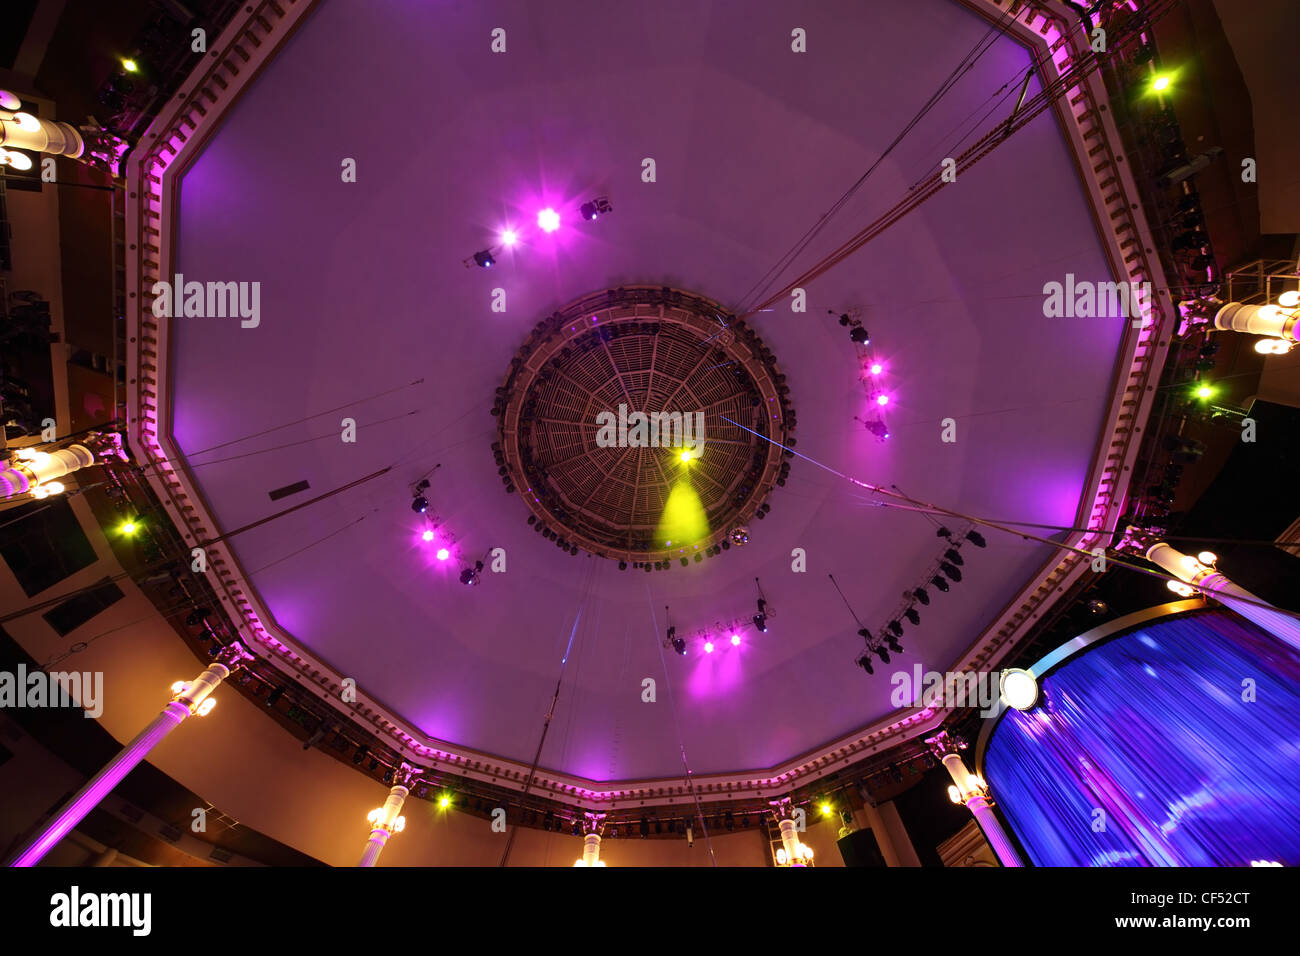 circus interior view on celling with pink light lamps and blue curtain Stock Photo